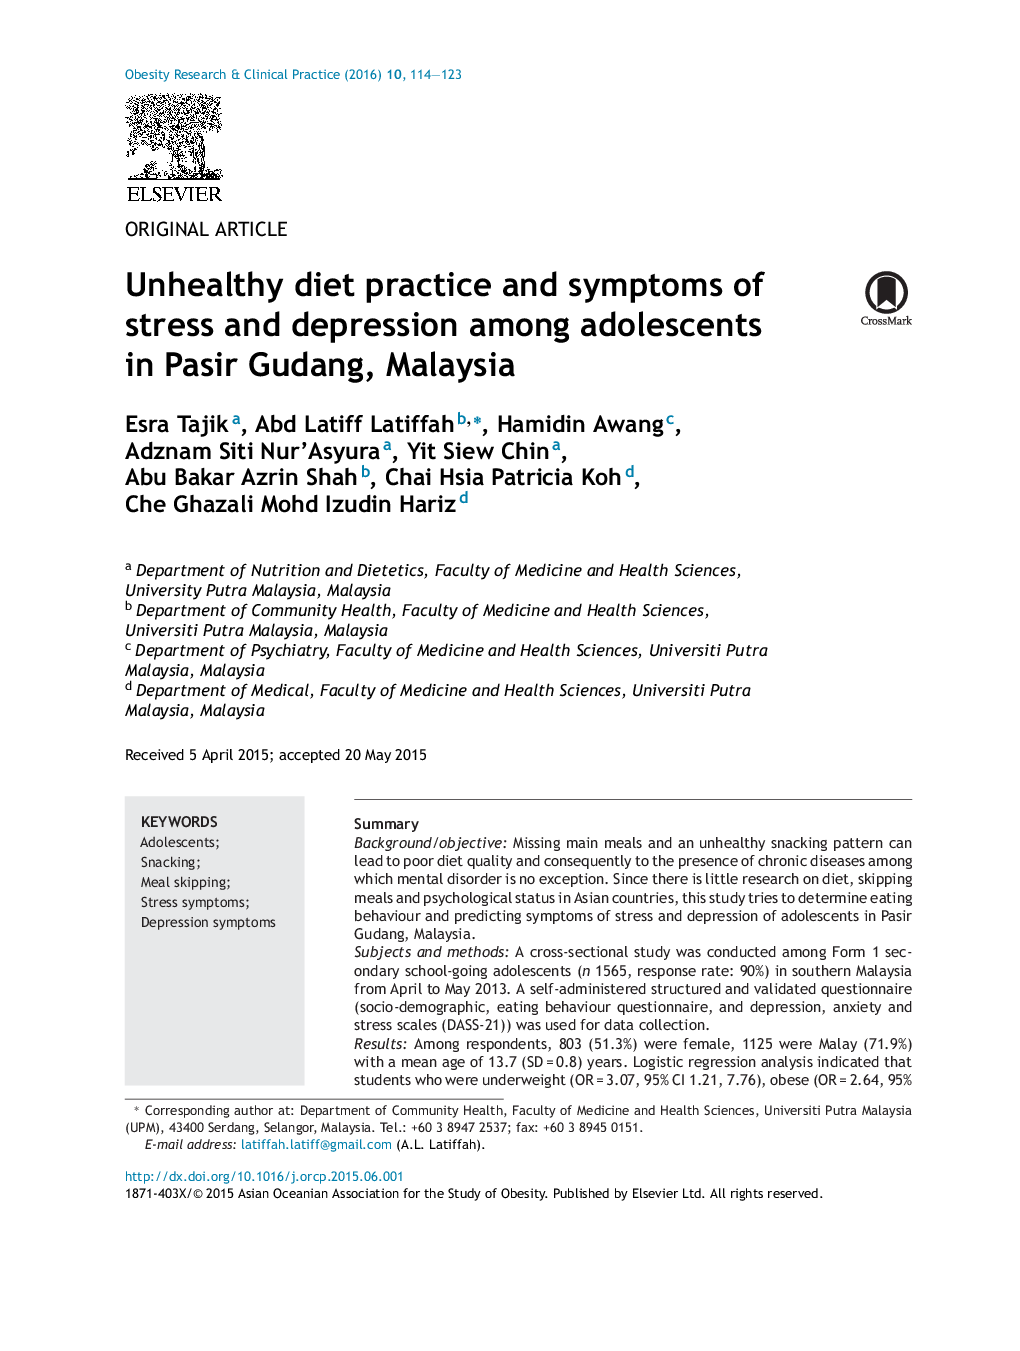 Unhealthy diet practice and symptoms of stress and depression among adolescents in Pasir Gudang, Malaysia